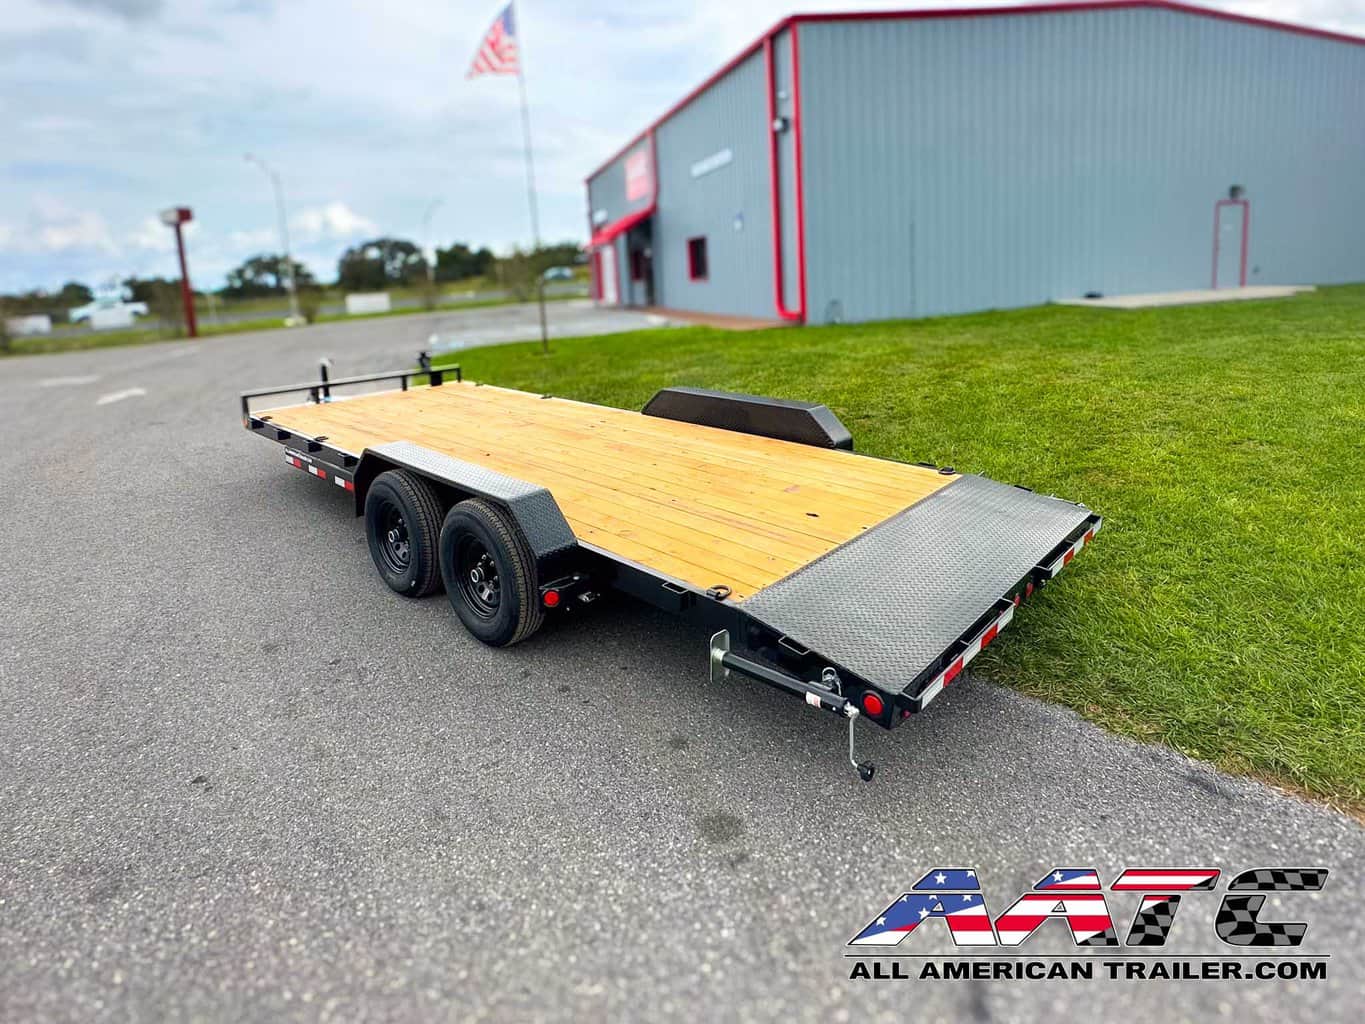 A PJ 20-foot car hauler trailer, model CE-202-SIR, designed for versatile vehicle transportation. This PJ Trailer features a 2-foot dovetail with 5-foot slide-in ramps, making it easy to load and unload vehicles. With a 10,000 GVWR, electric brakes, and a black finish, it's a durable and efficient choice for car hauling with a load capacity of 7500 lbs. The bumper pull design allows for convenient towing